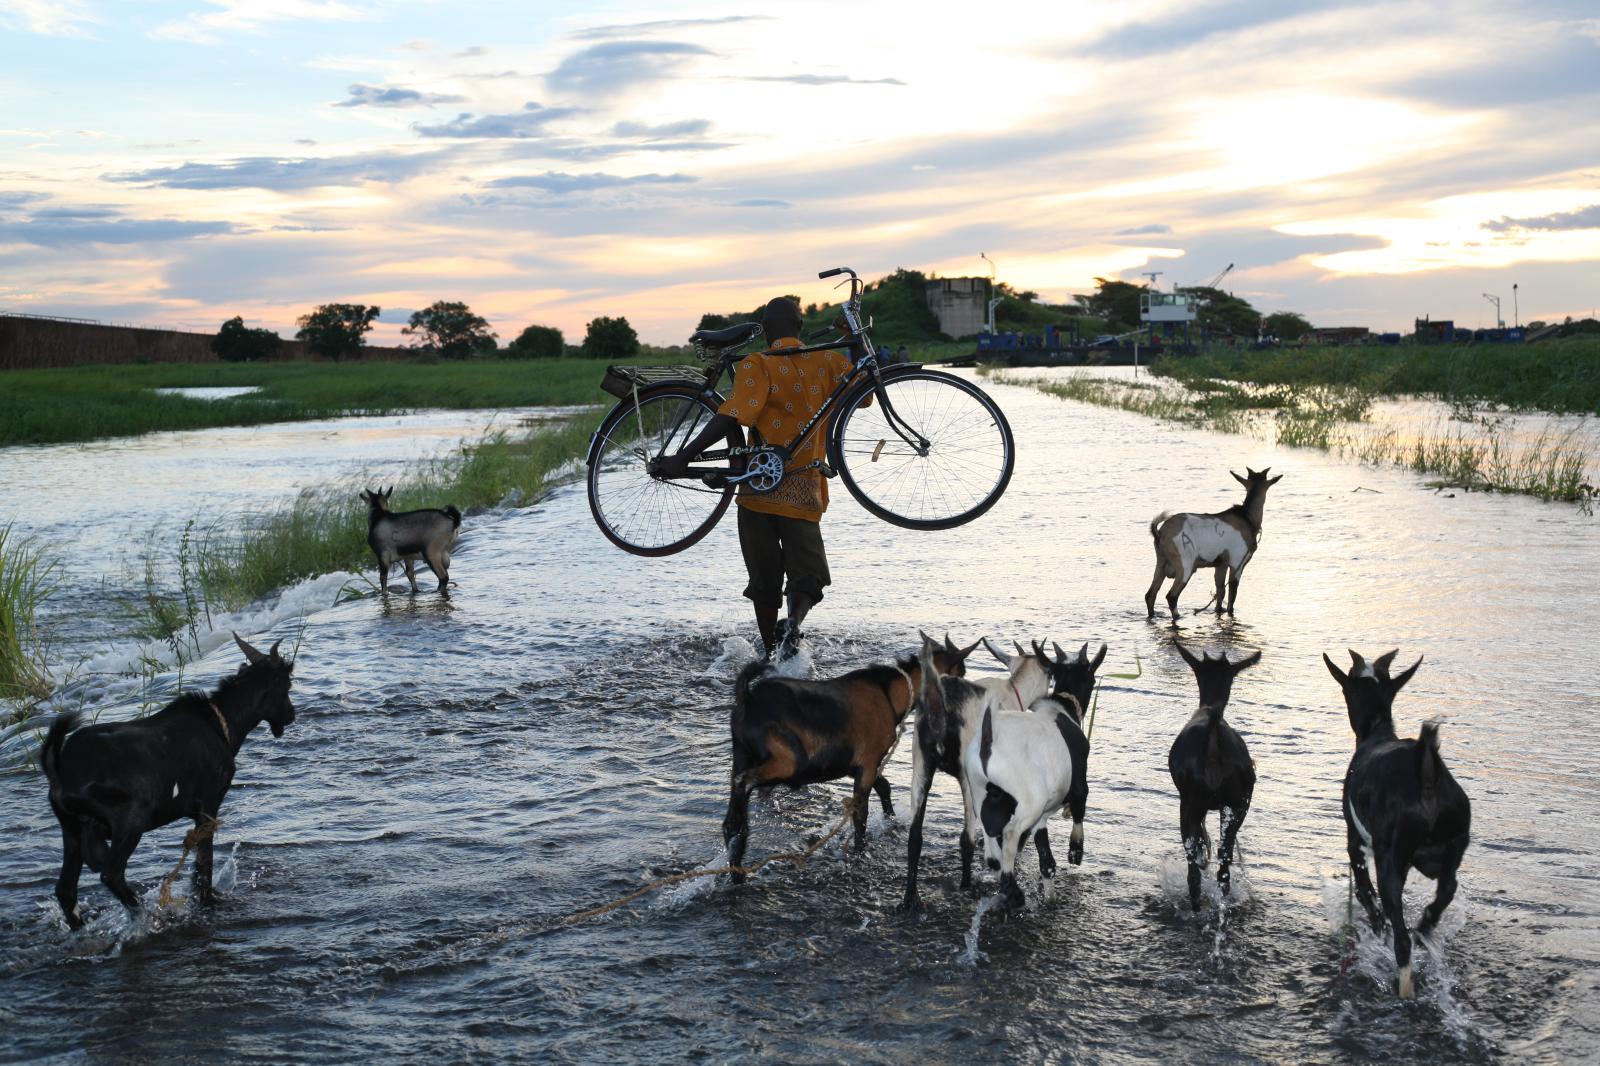 Mozambique Floods | Buy this image